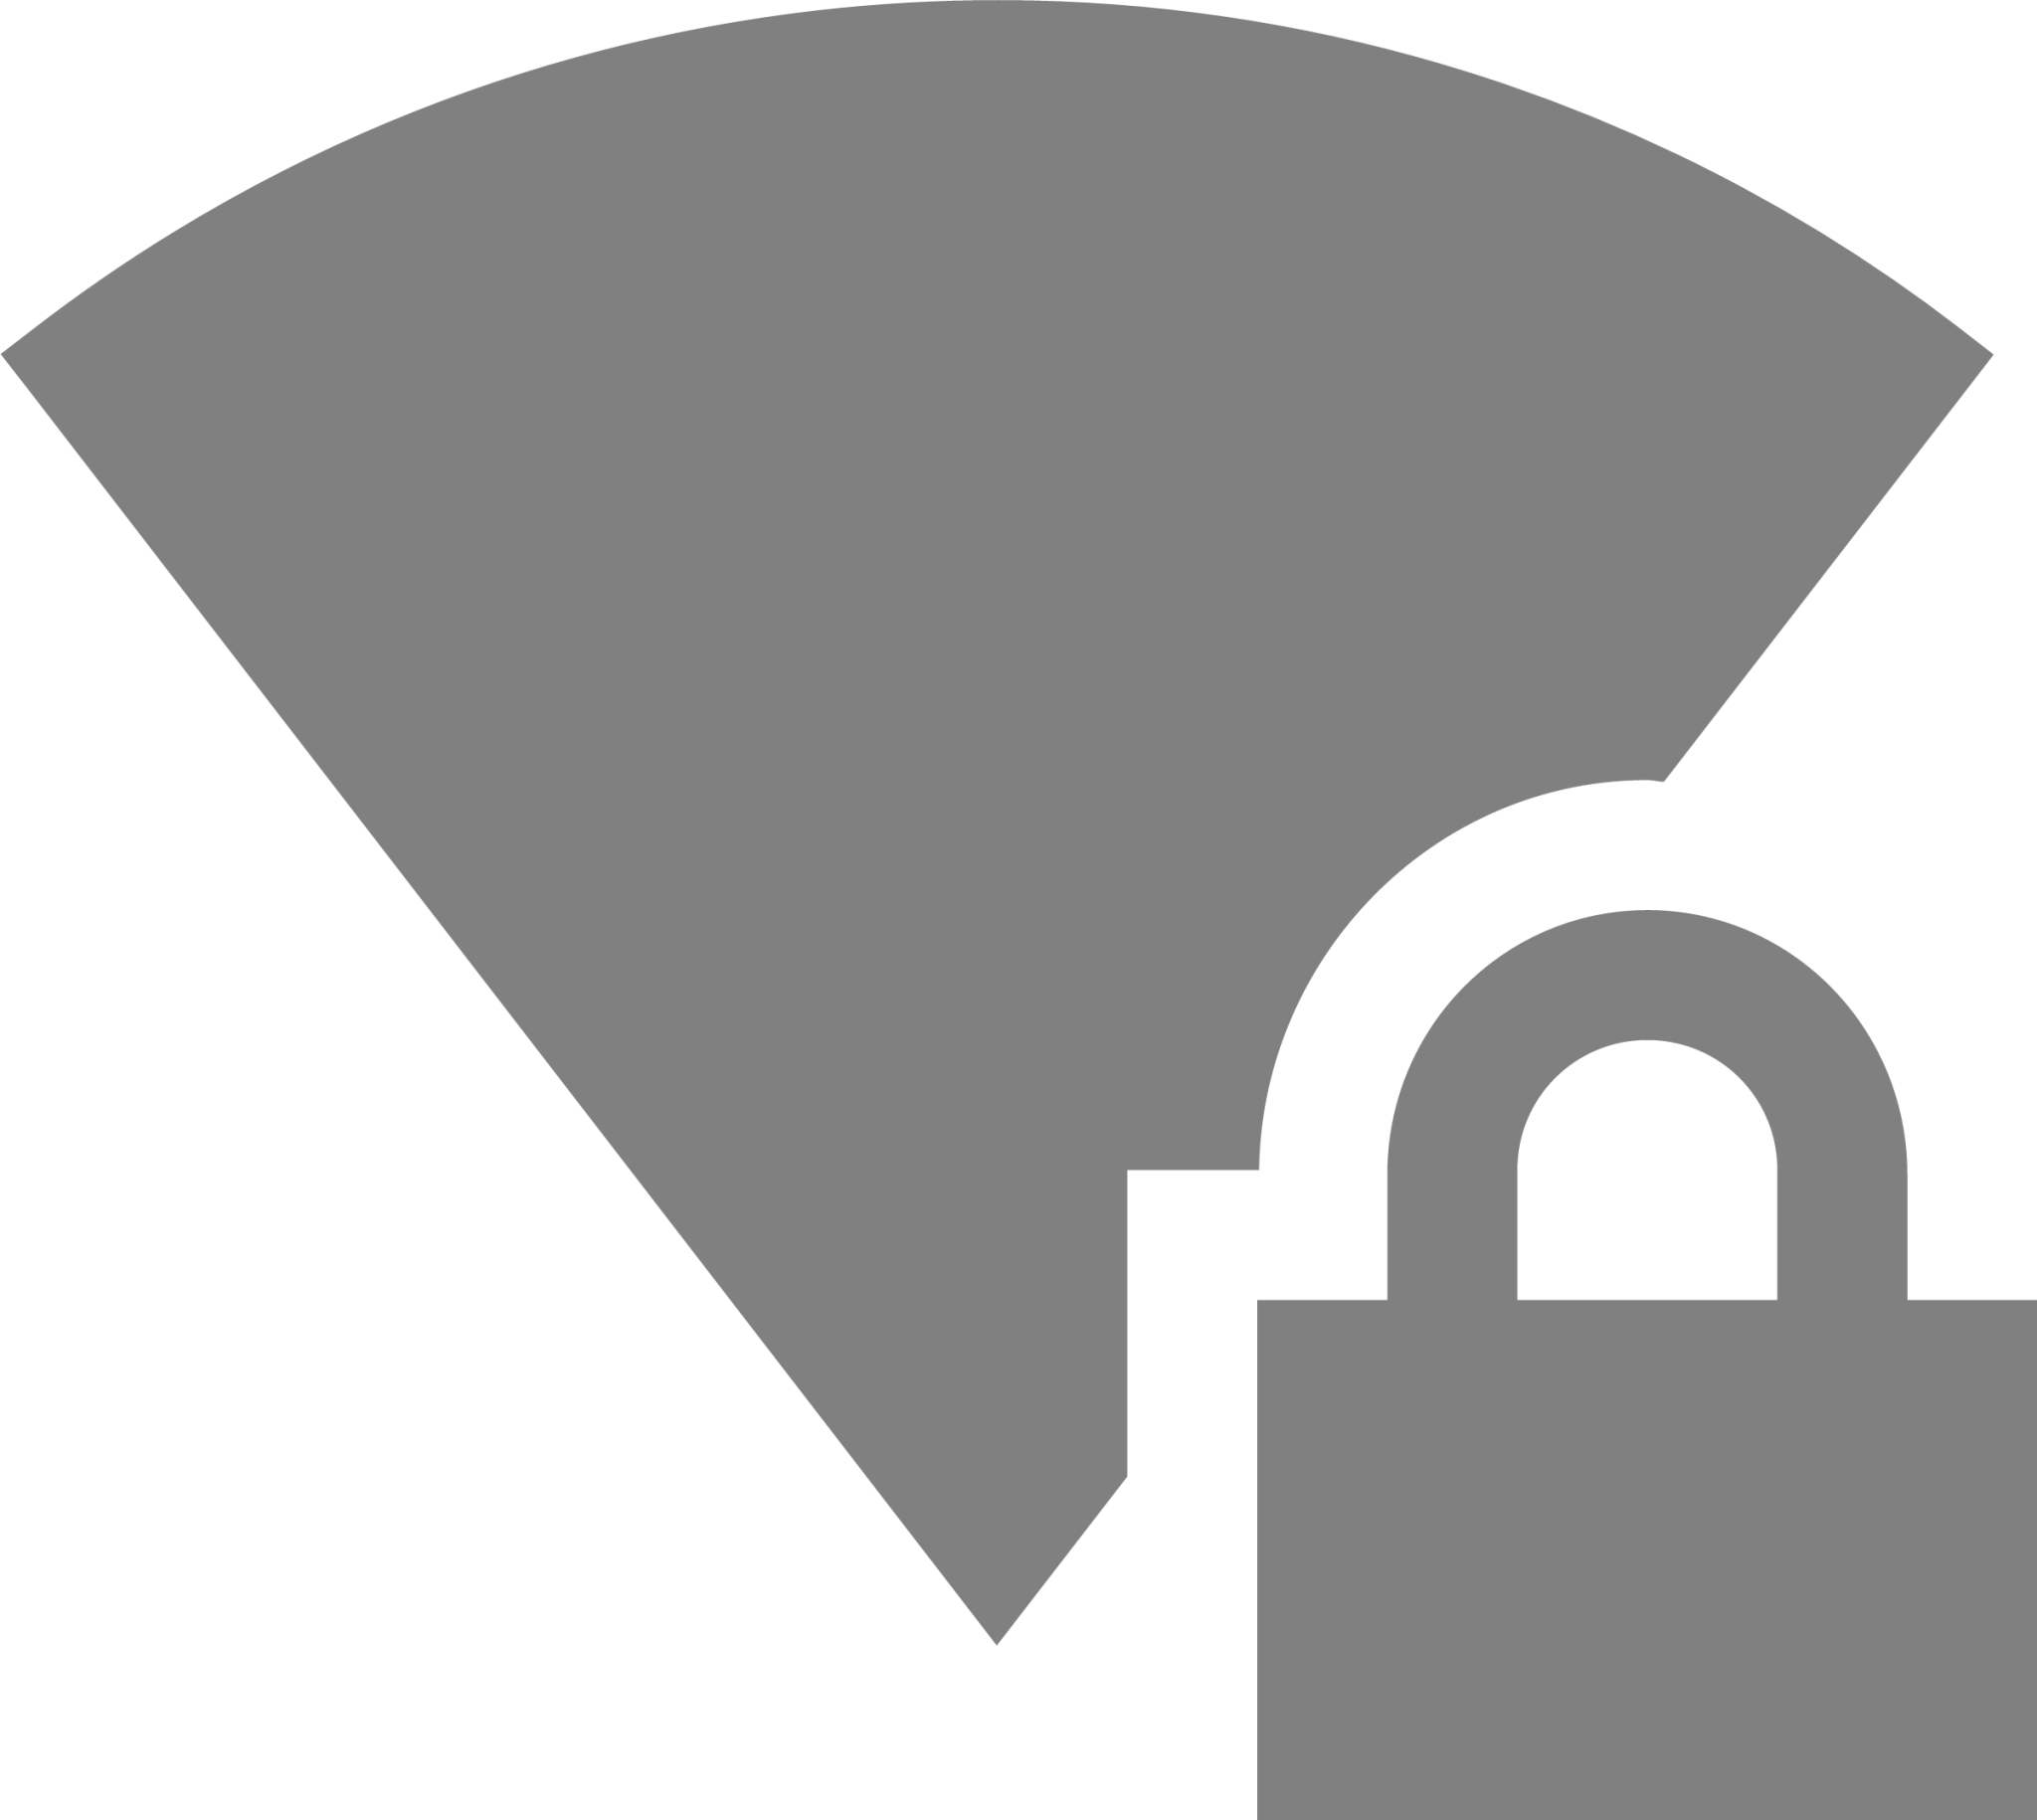 network wireless signal excellent secure symbolic icon